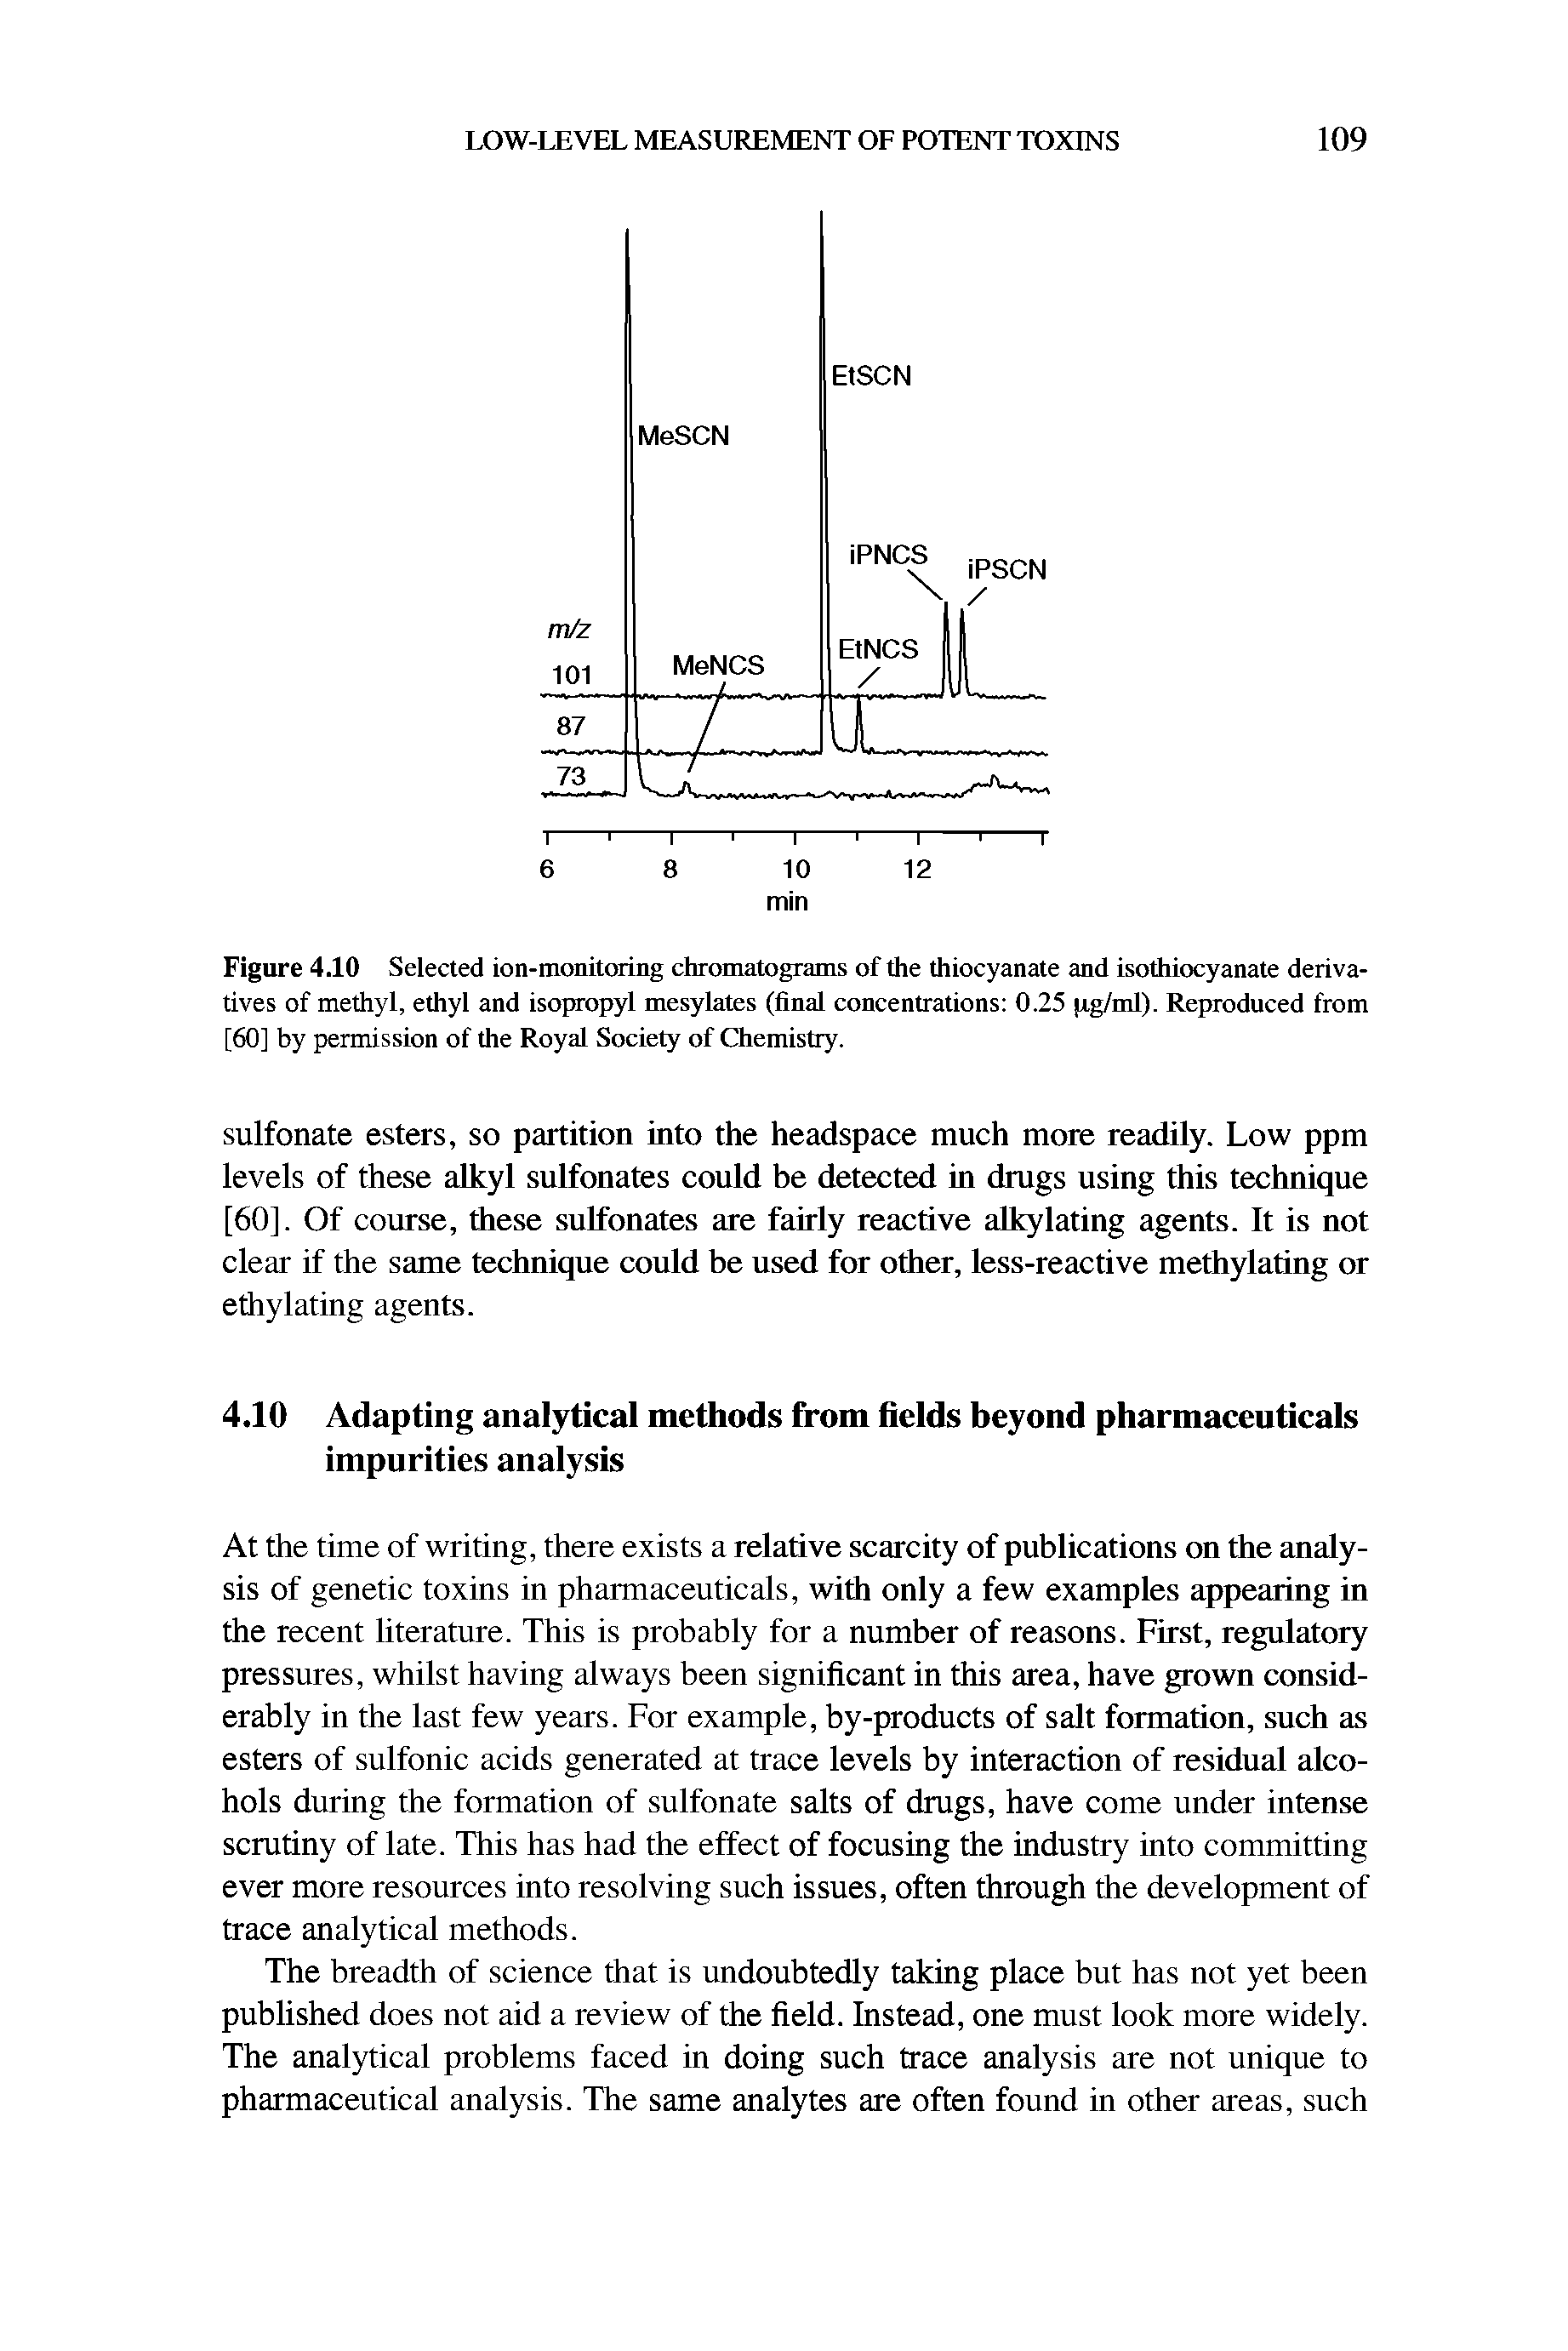 Figure 4.10 Selected ion-monitoring chromatograms of the thiocyanate and isothiocyanate derivatives of methyl, ethyl and isopropyl mesylates (final concentrations 0.25 pg/ml). Reproduced from [60] by permission of the Royal Society of Chemistry.